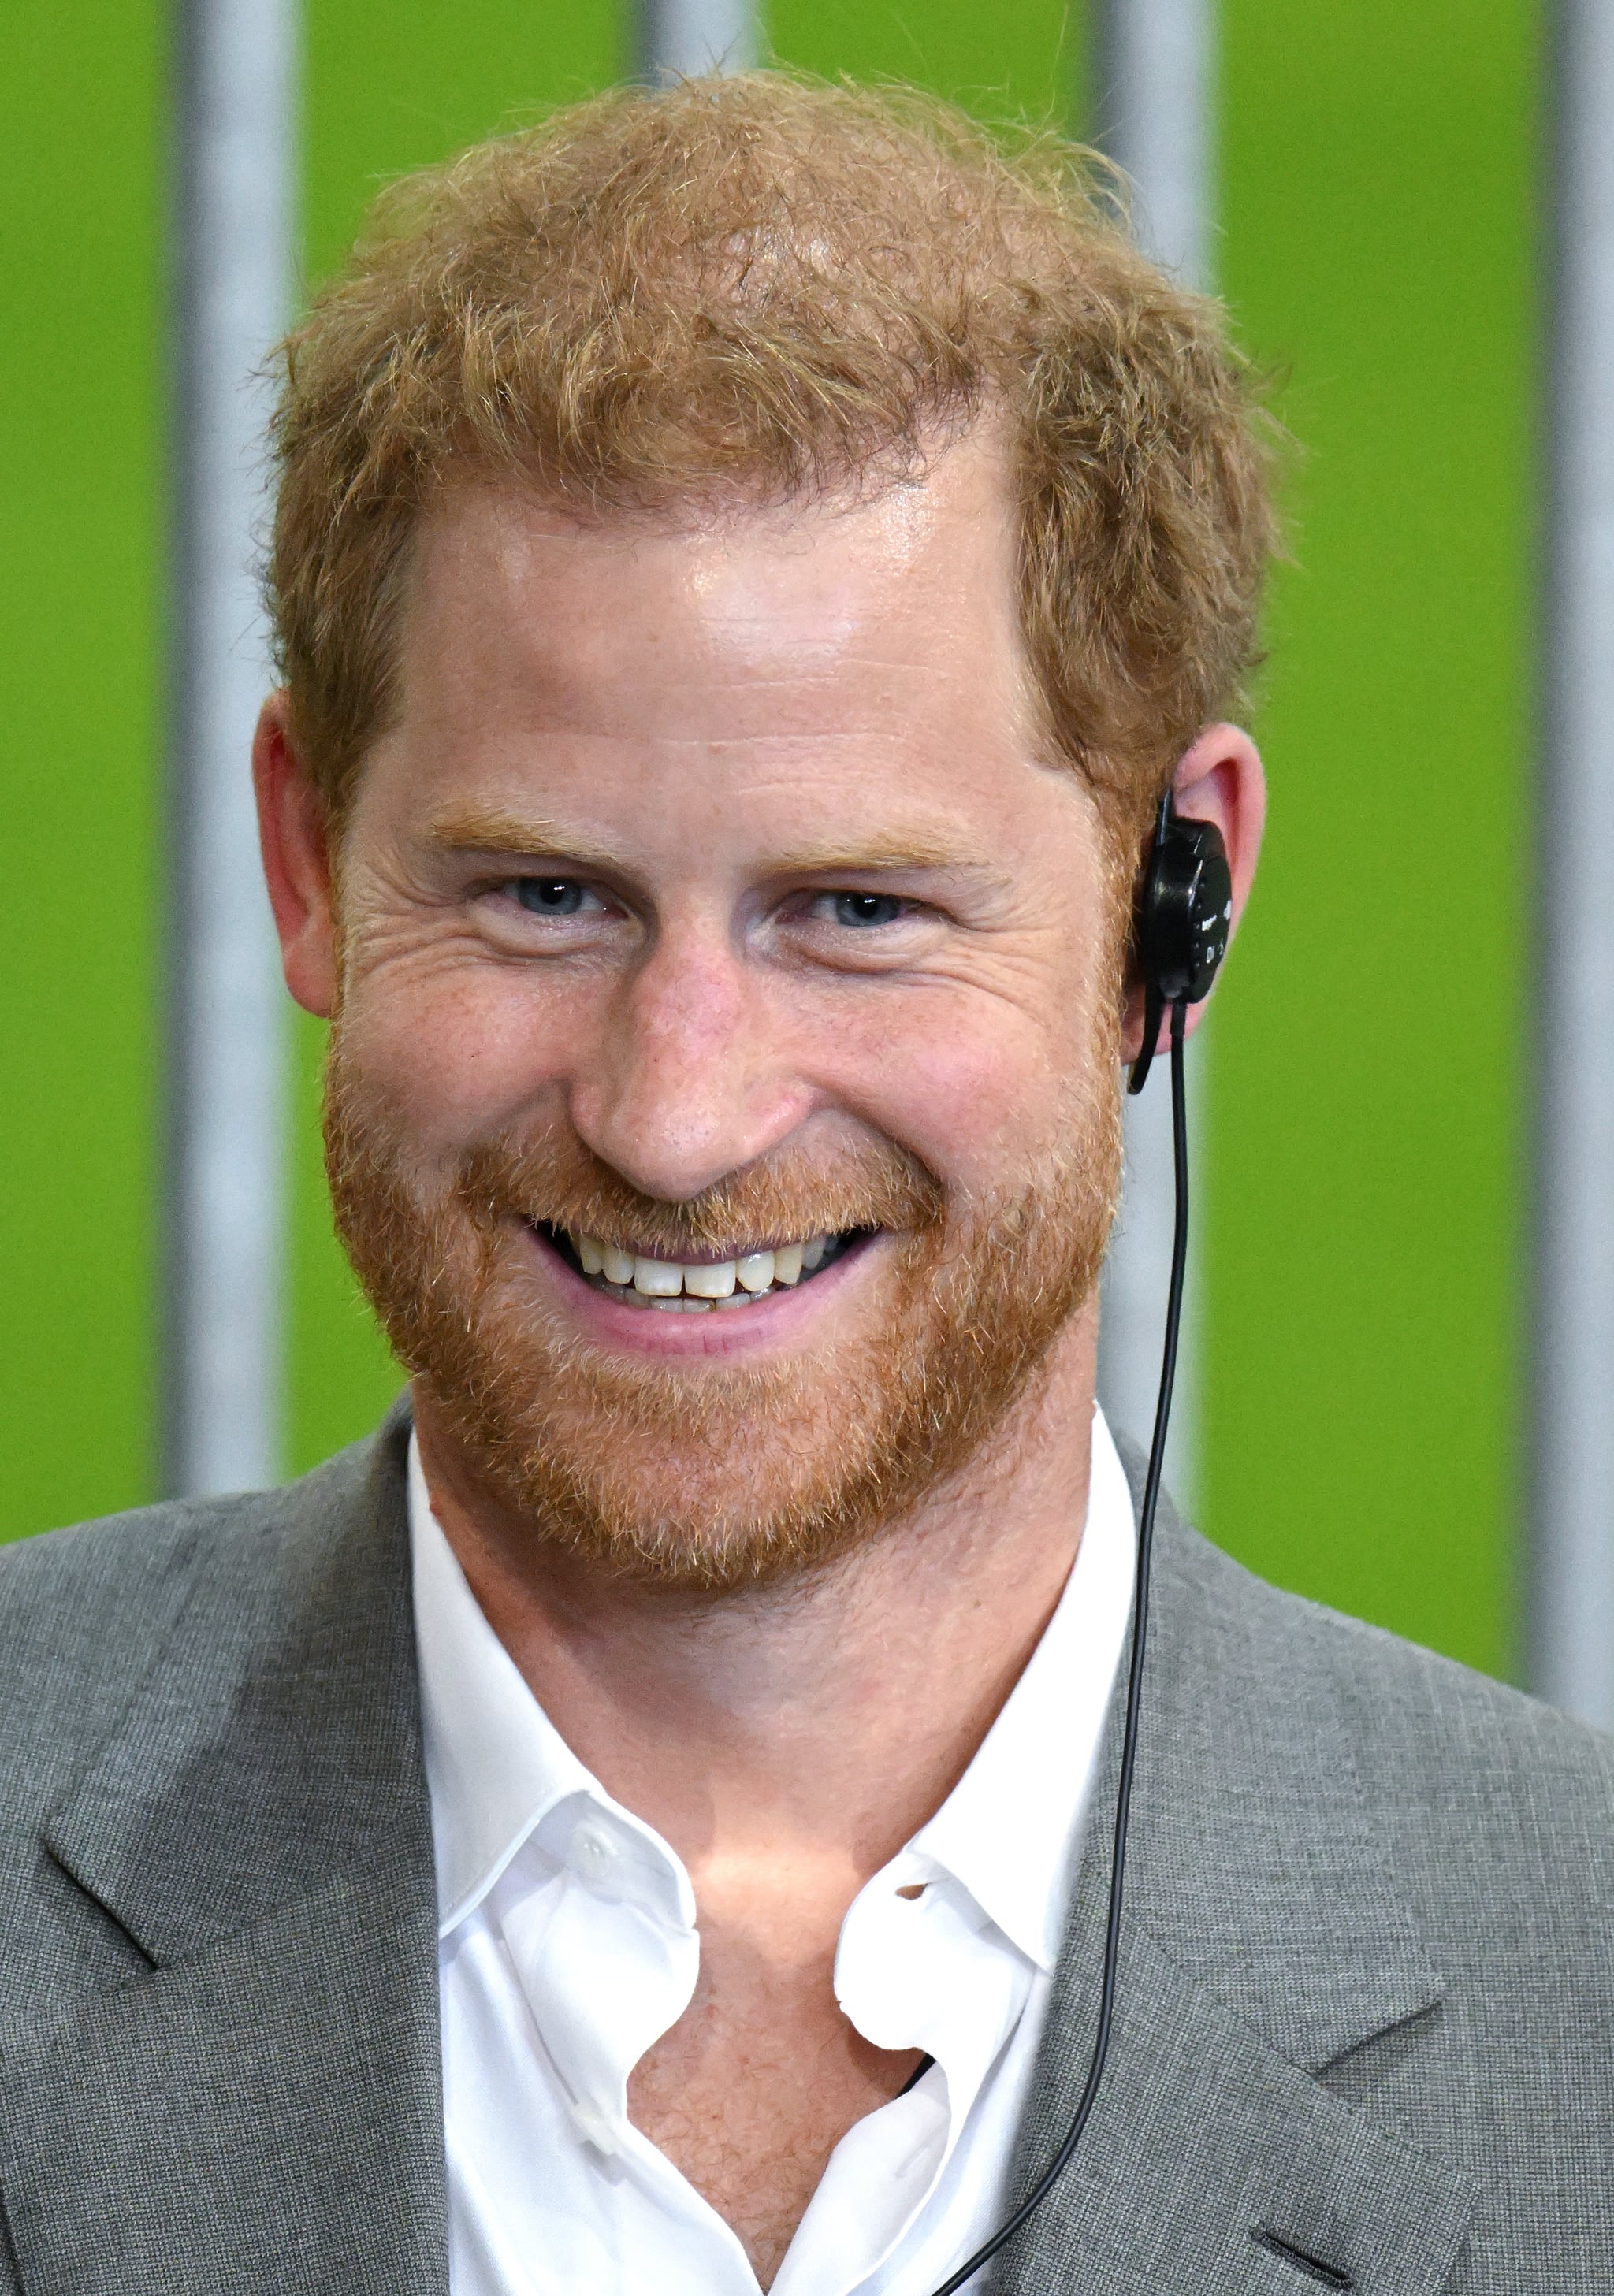 DUSSELDORF, GERMANY - SEPTEMBER 06: Prince Harry, Duke of Sussex attends a press conference at the Merkur Spiel Arena during the Invictus Games Dusseldorf 2023 - One Year To Go launch event on September 06, 2022 in Dusseldorf, Germany. The Invictus Games will be held in Germany for the first time in September 2023. (Photo by Karwai Tang/WireImage)